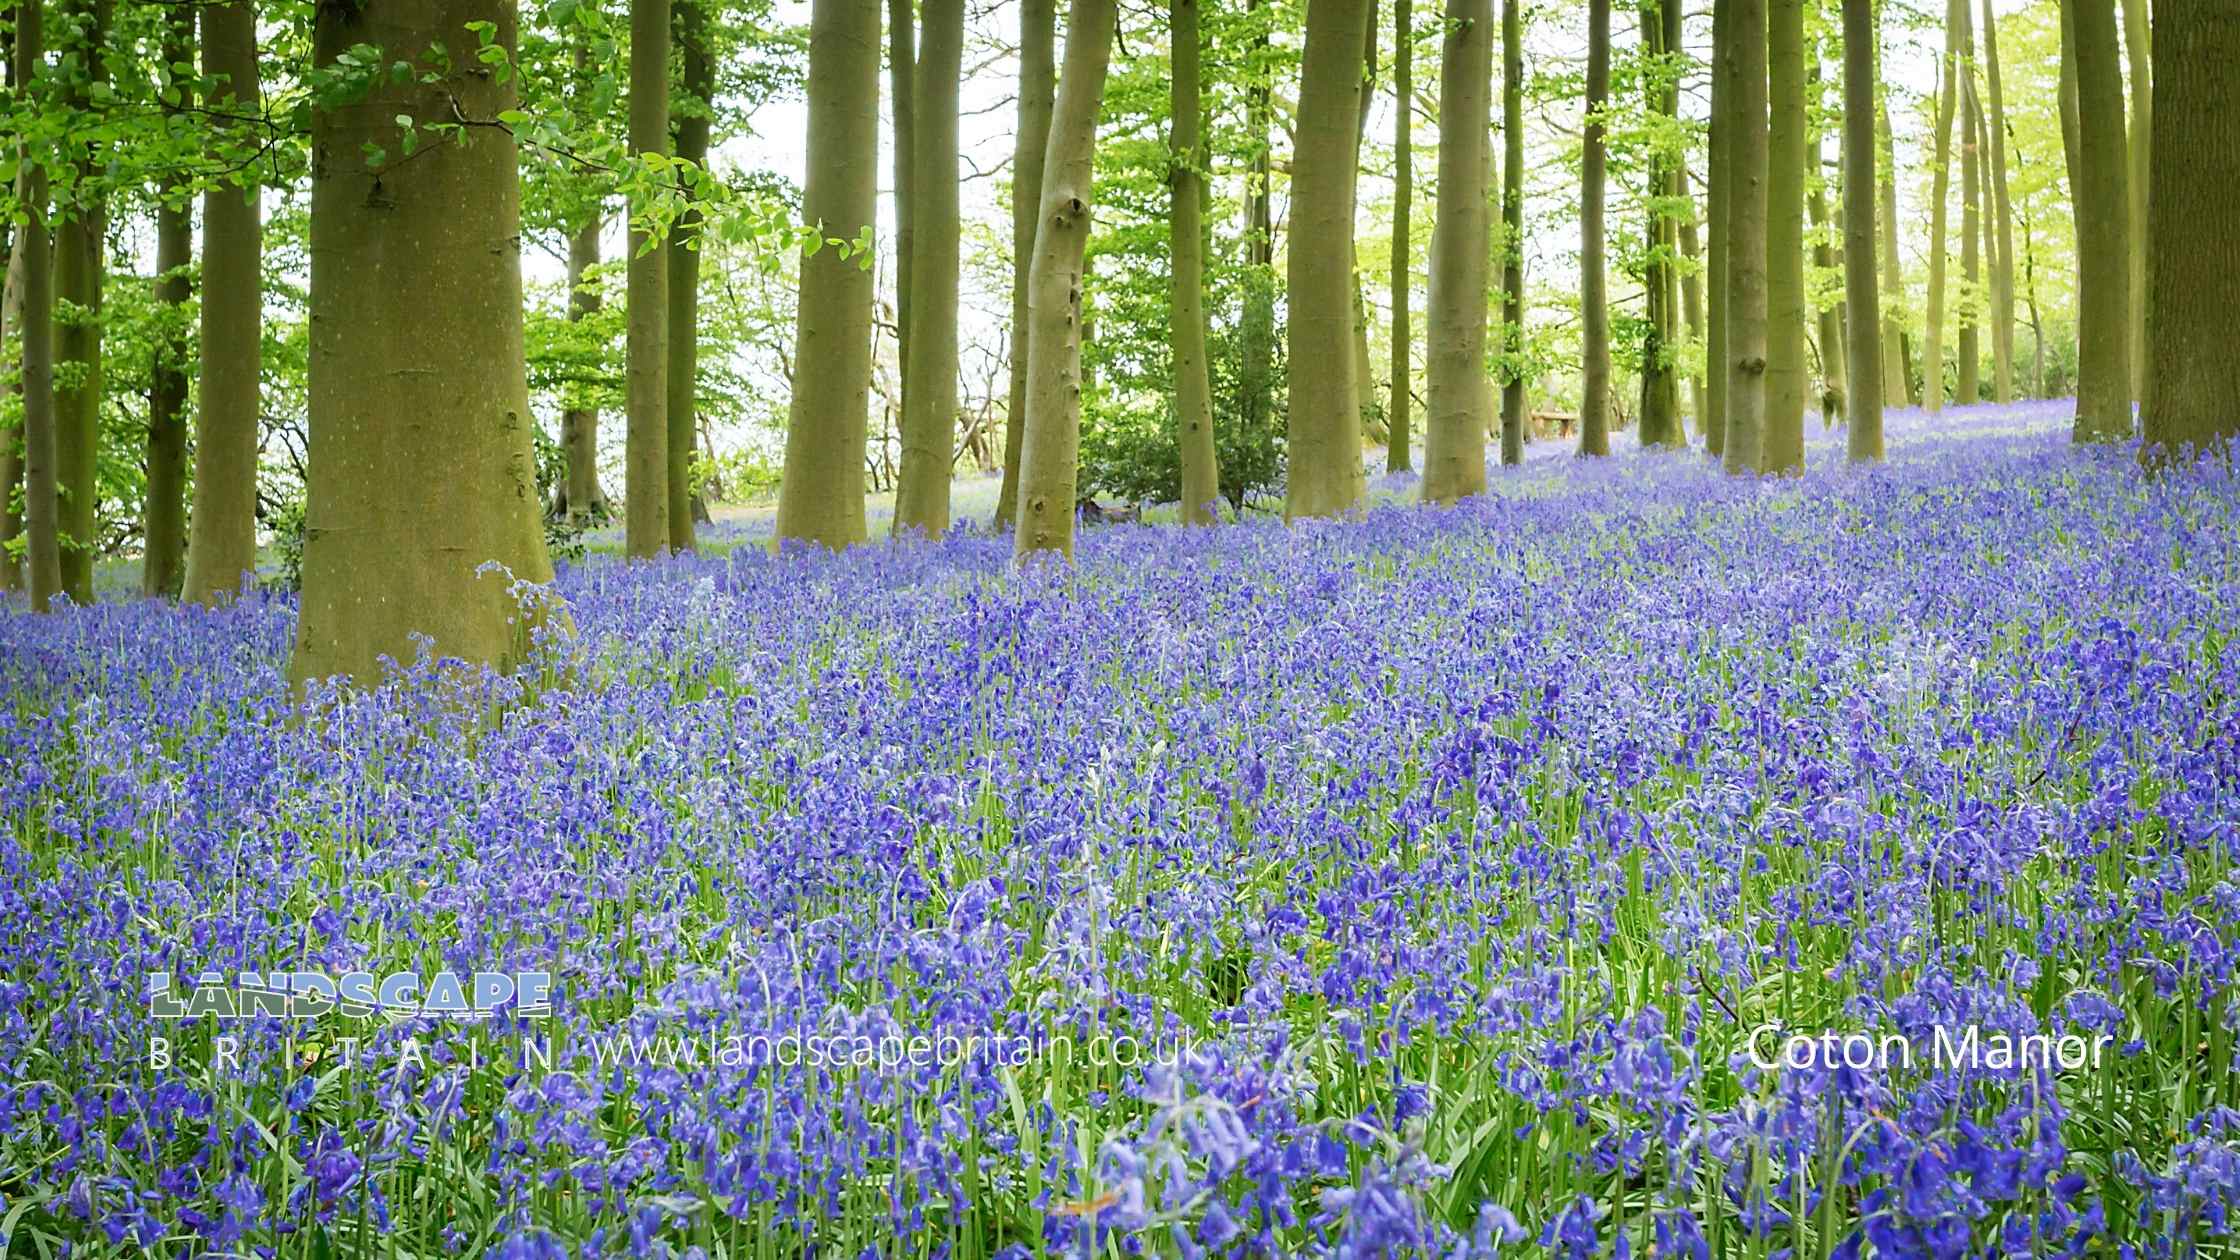 Bluebell Woods in Northamptonshire